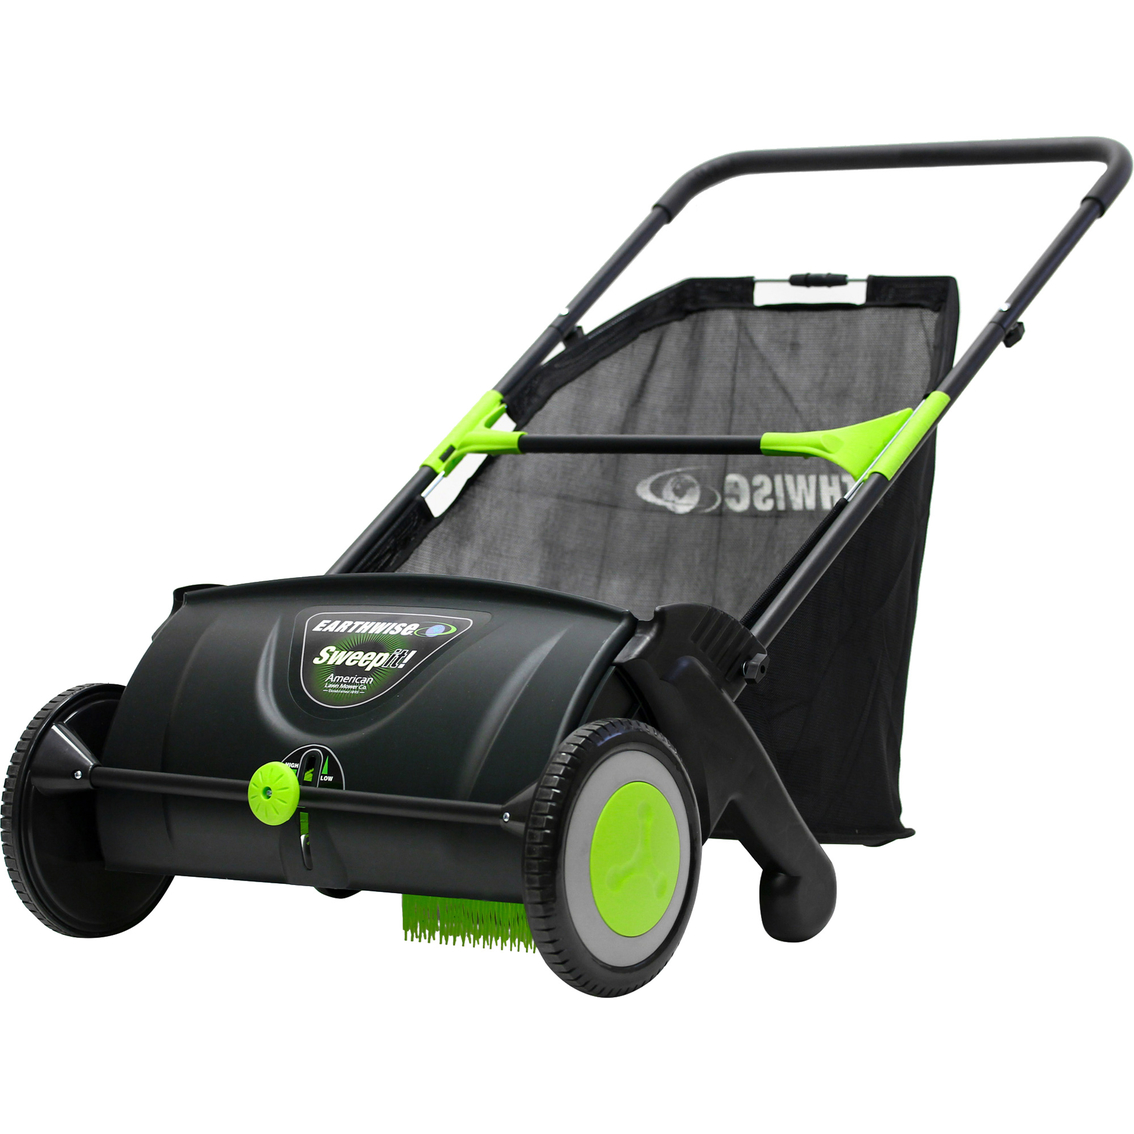 Earthwise 21 in. Lawn Sweeper - Image 2 of 5